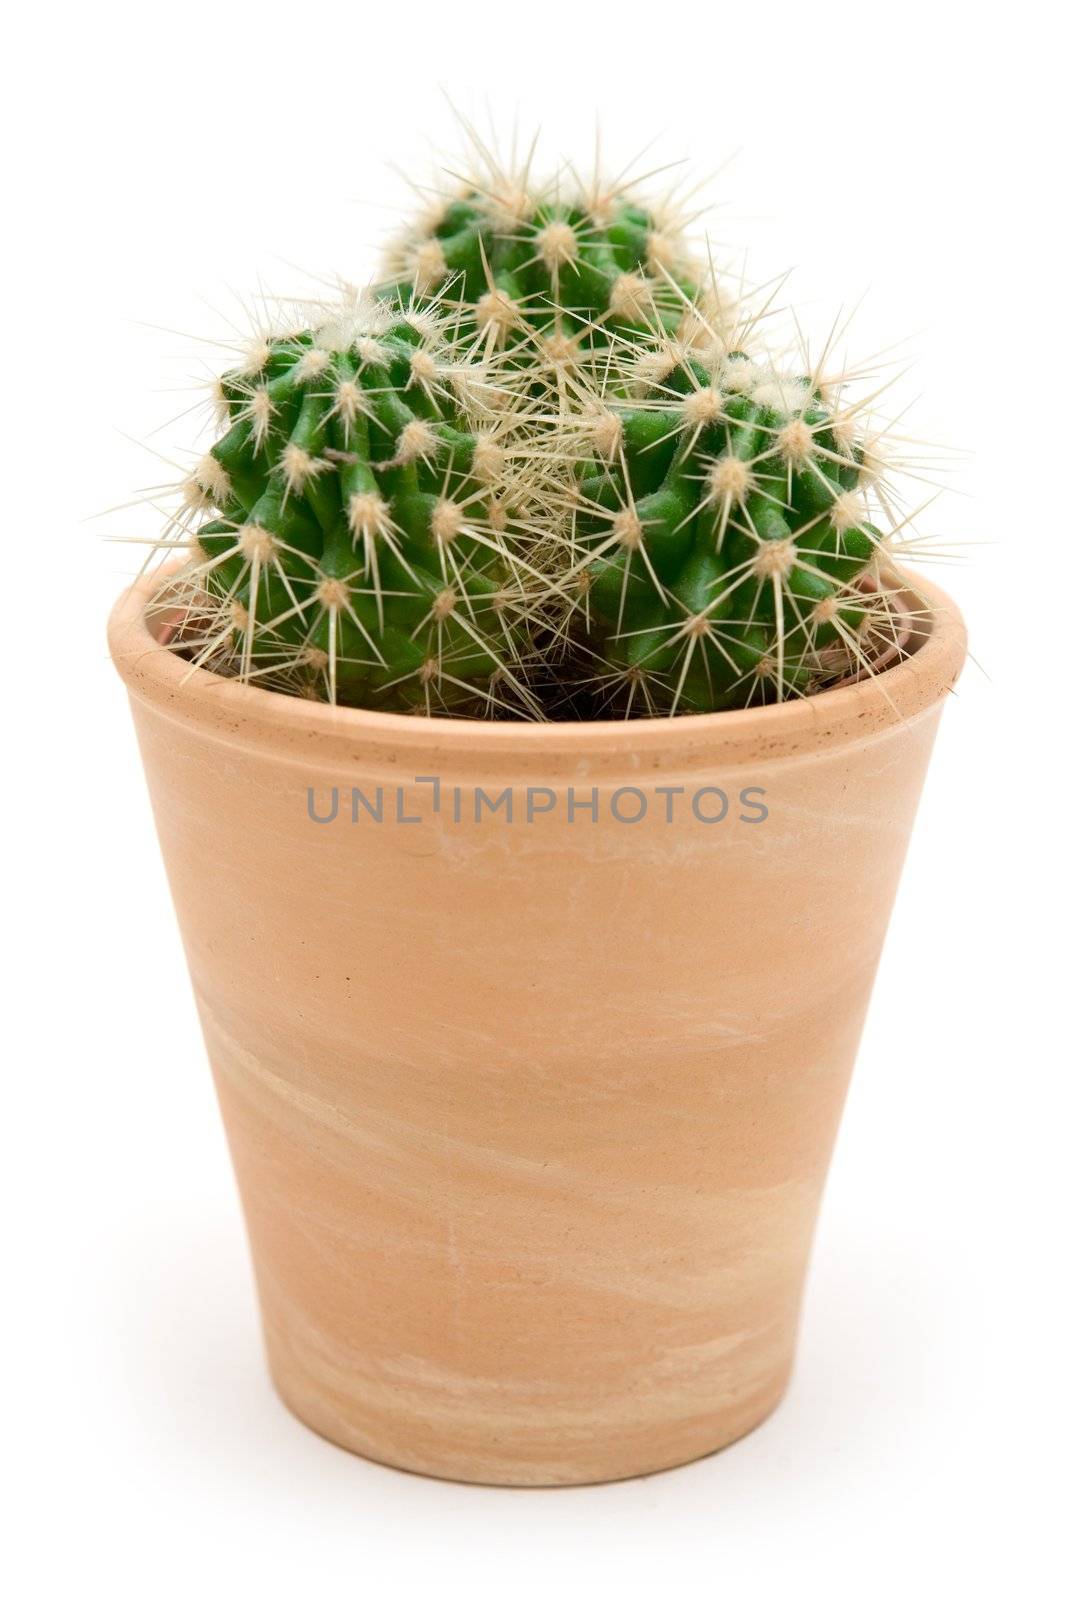 Prickly cactus in a brown flowerpot. Isolated on a white background.